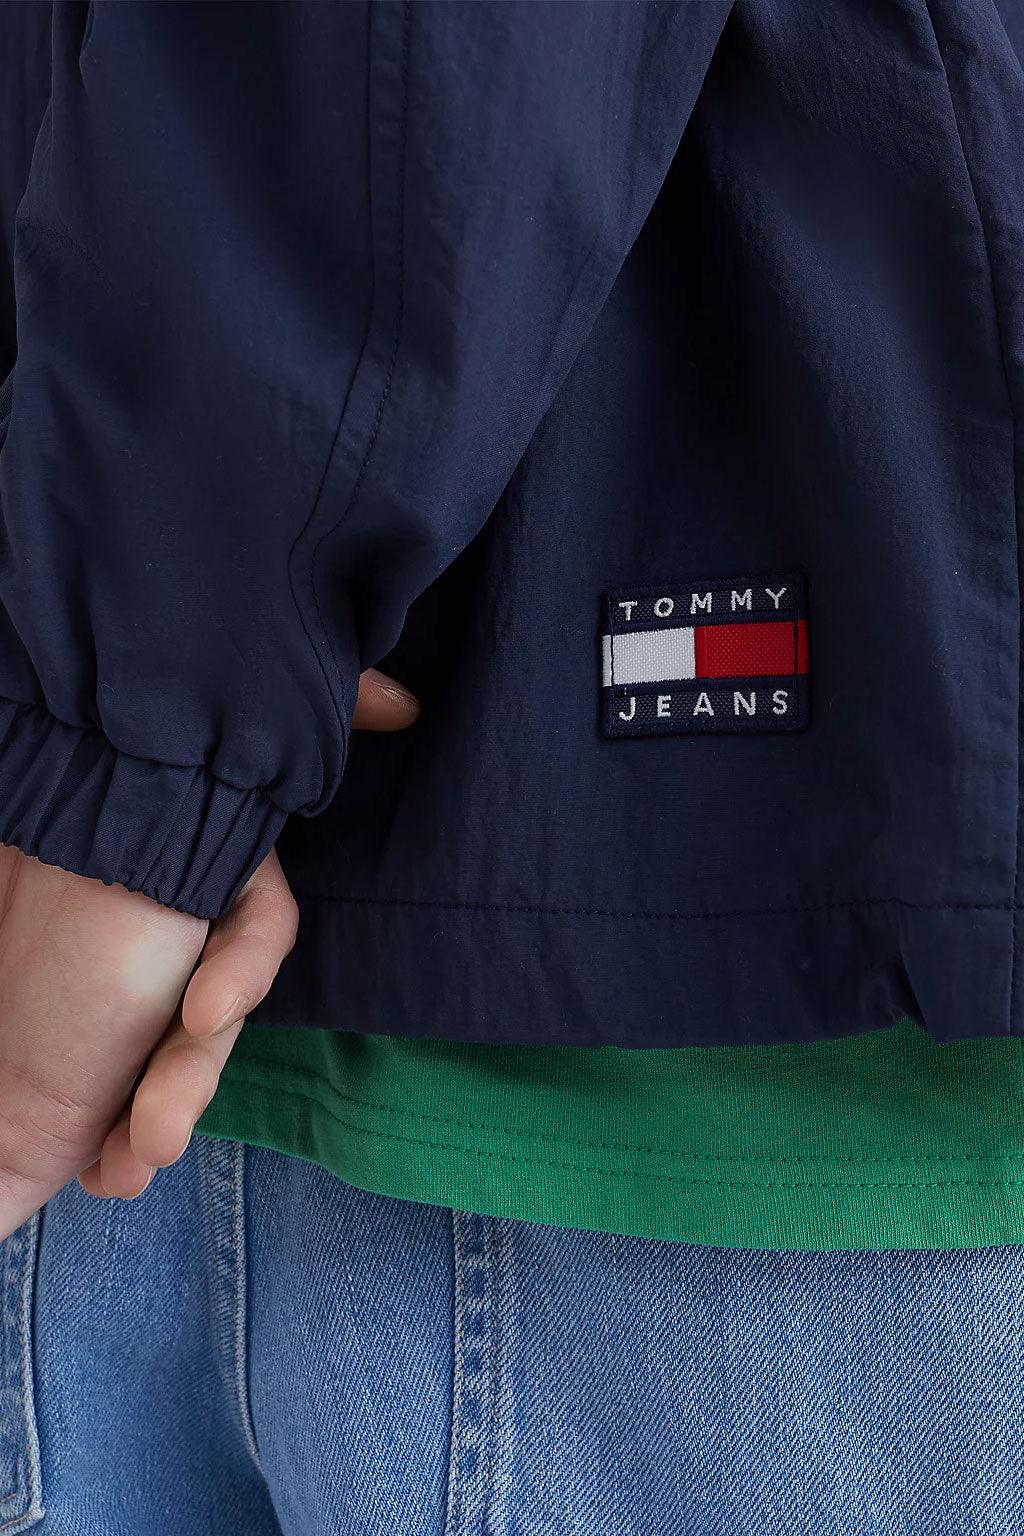 Tommy Jeans jack | Big Boss | the menswear concept